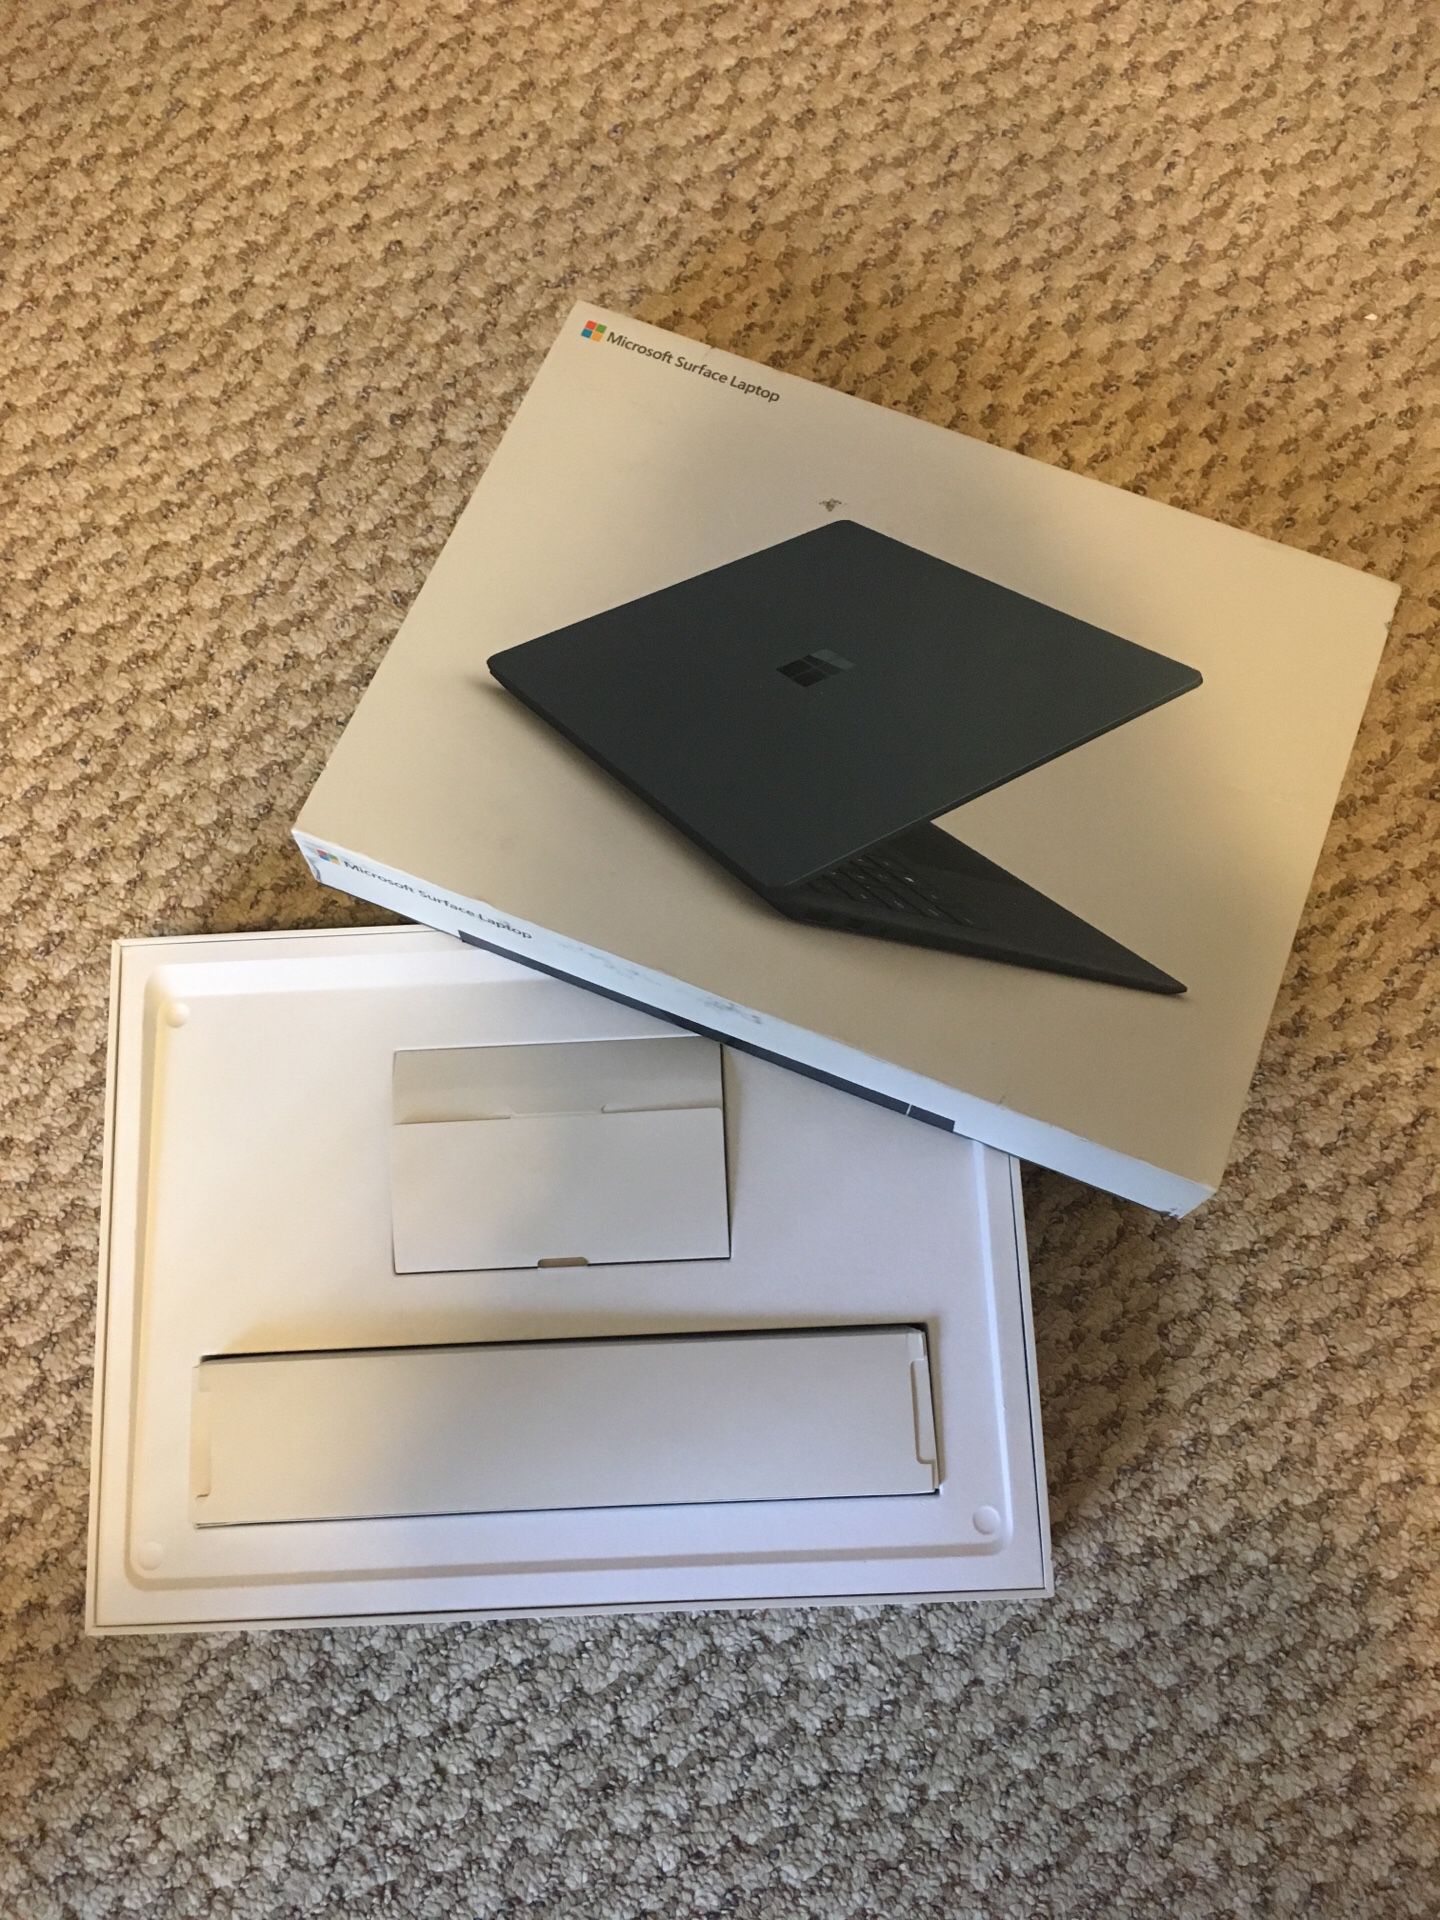 Microsoft surface laptop 2 - JUST THE BOX